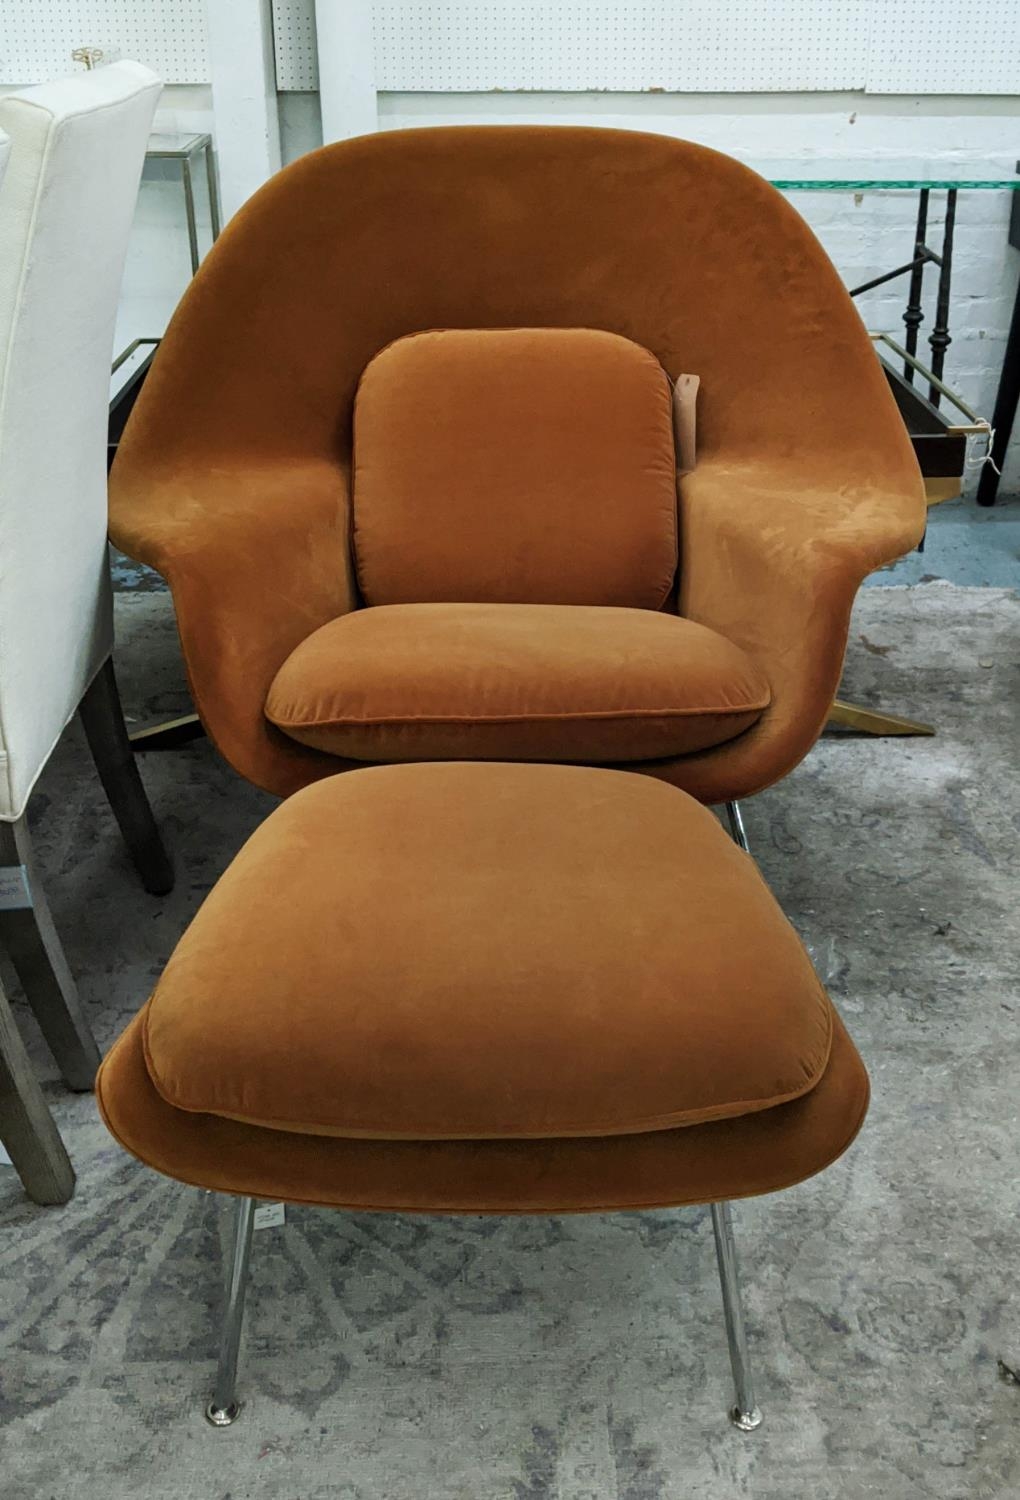 KNOLL WOMB CHAIR WITH OTTOMAN BY EERO SAARINEN, in Knoll Oh La La velvet, 95cm H. (2) - Image 2 of 4